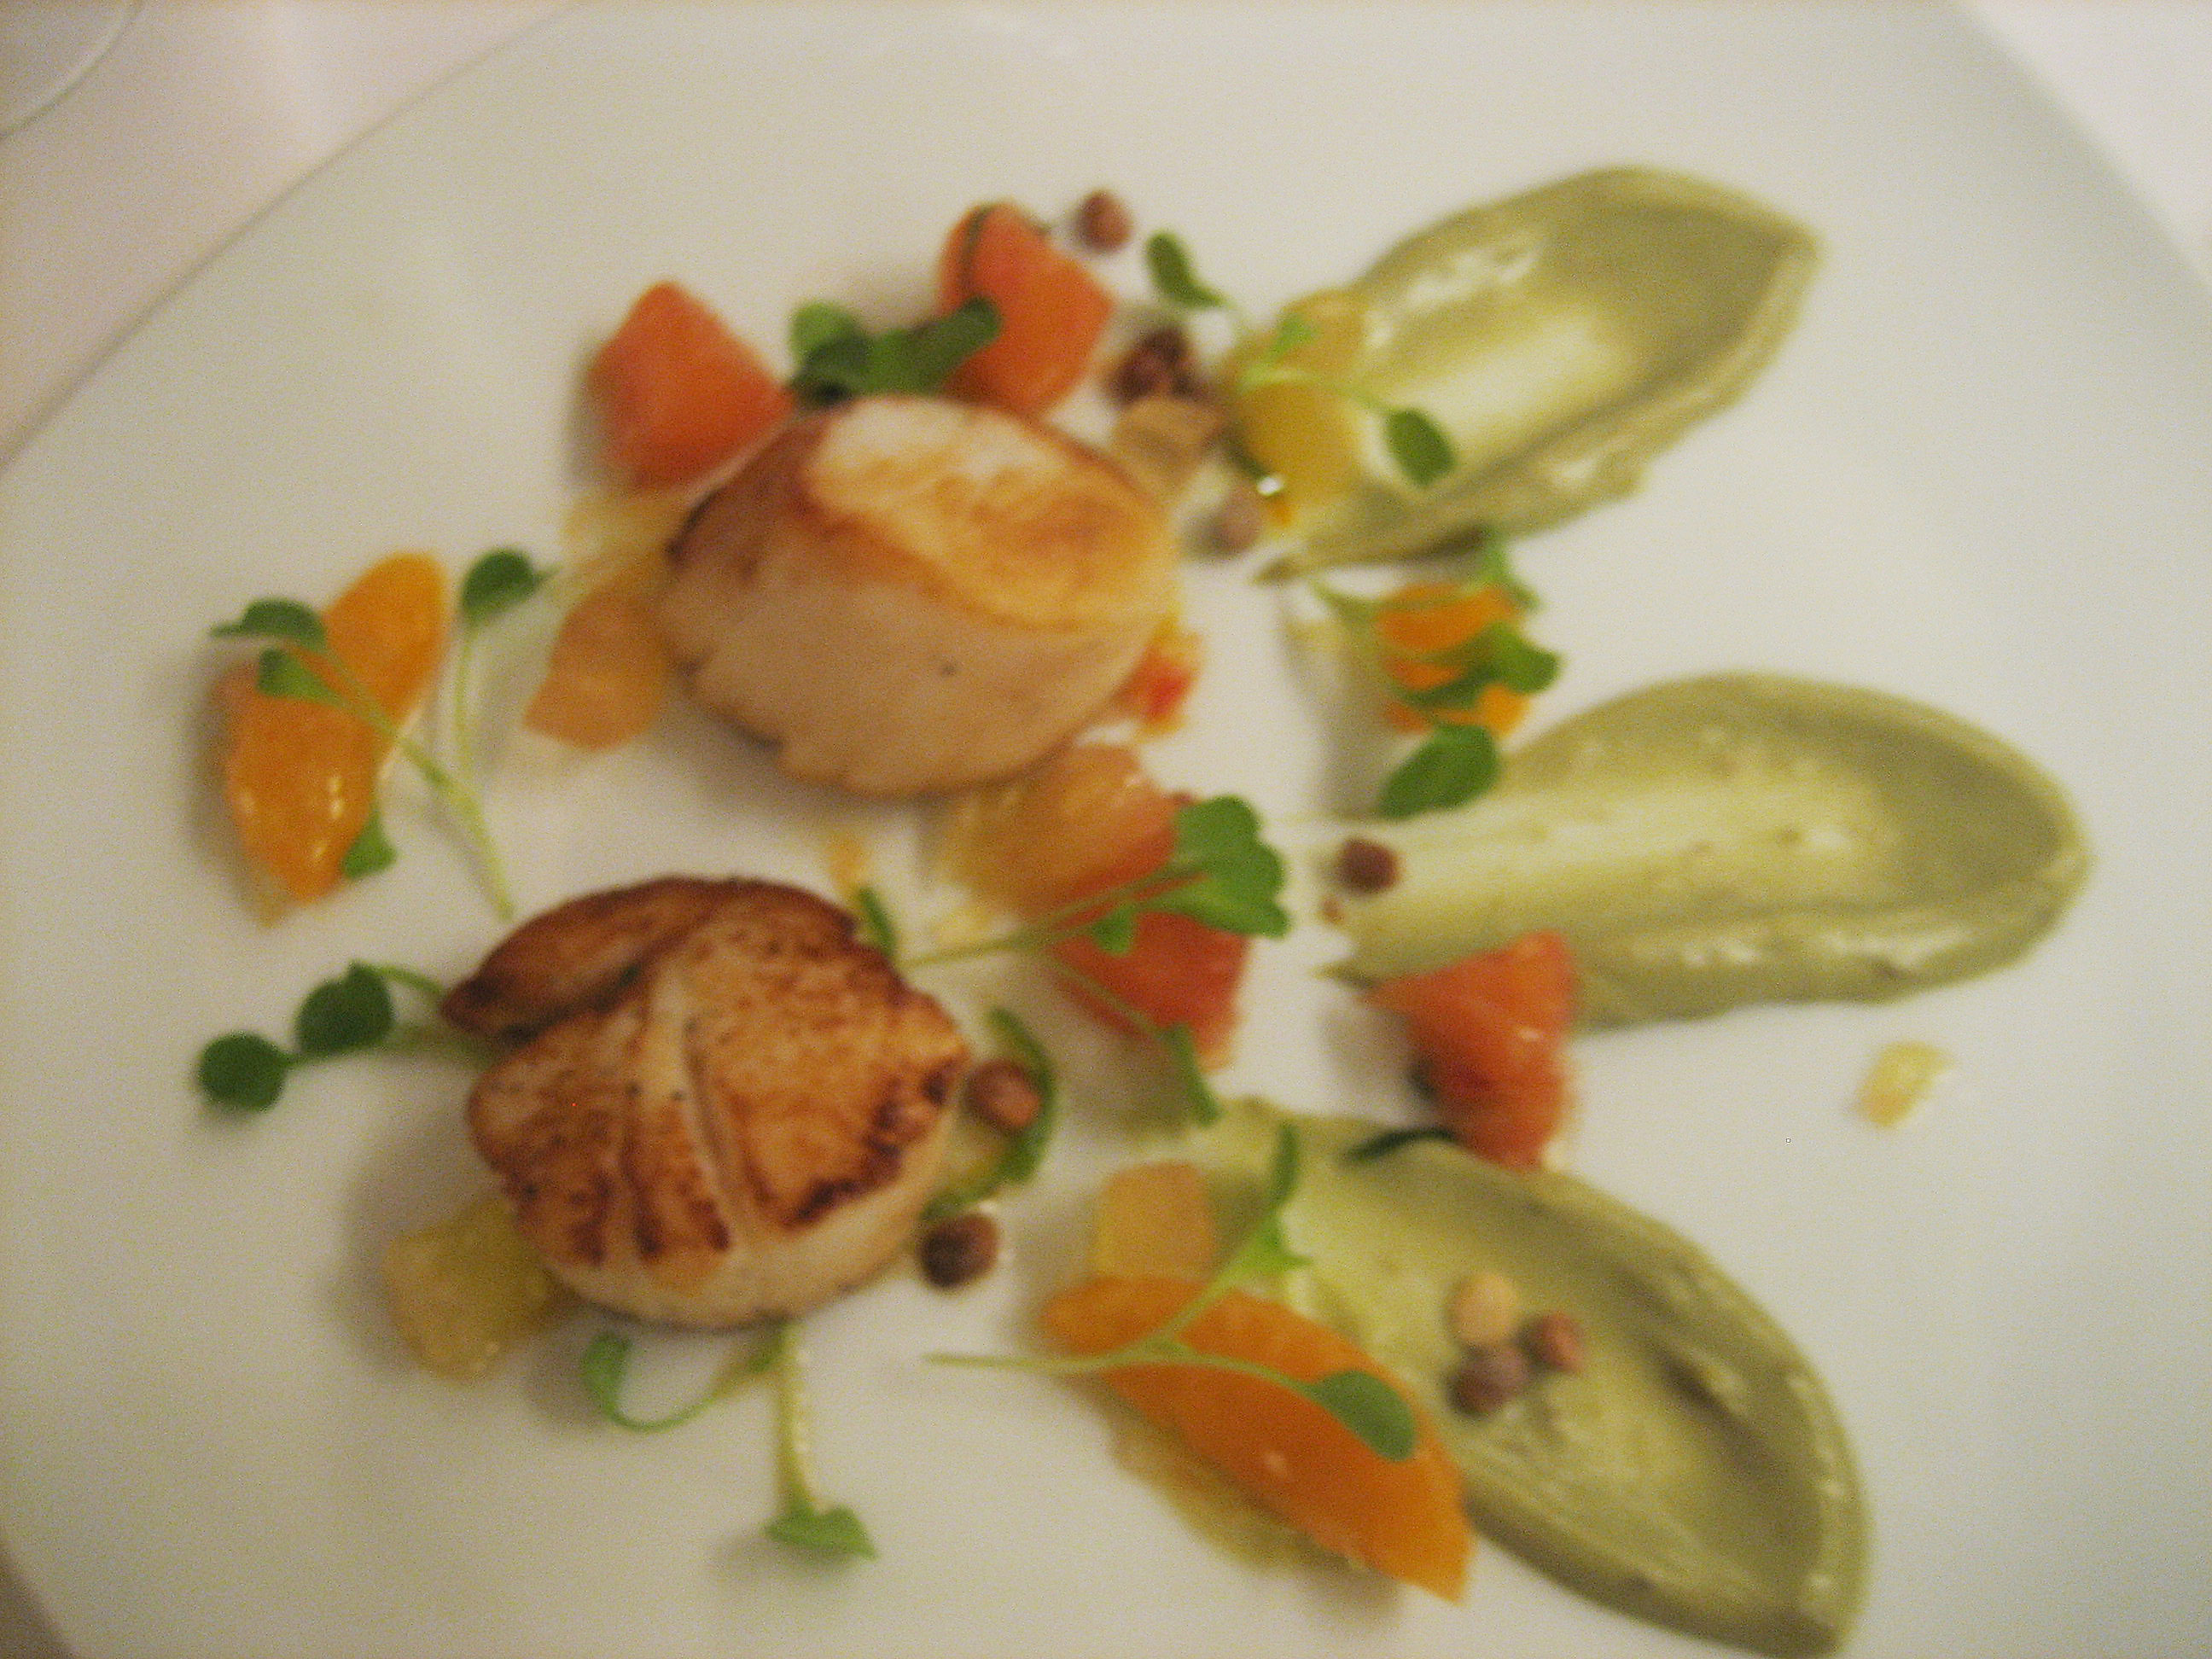 The seared scallops that almost could